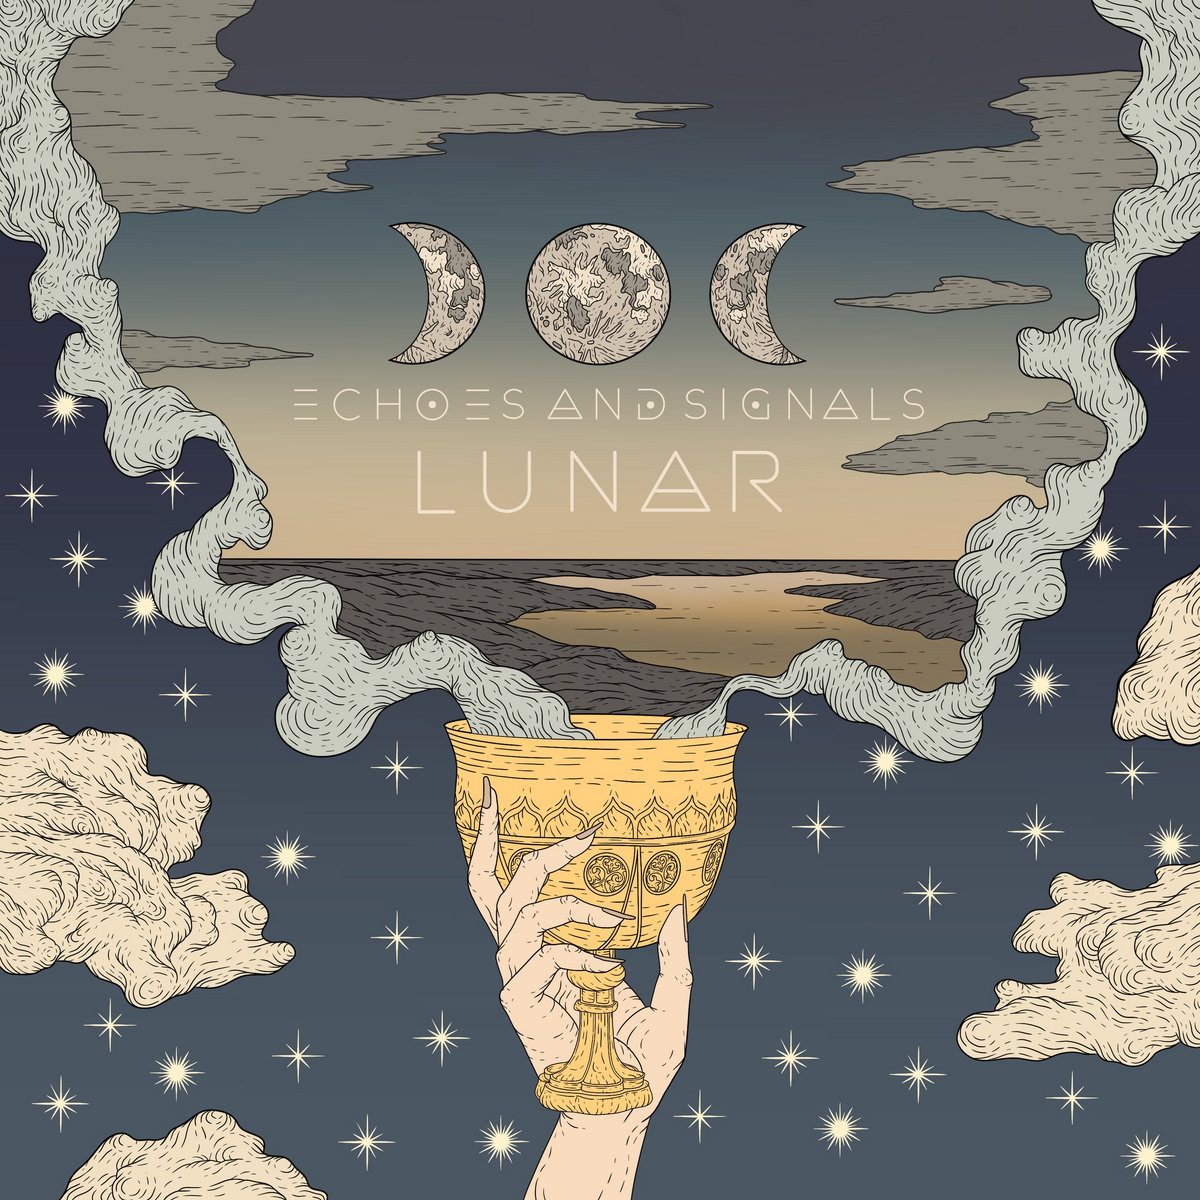 Echoes and Signals - Lunar